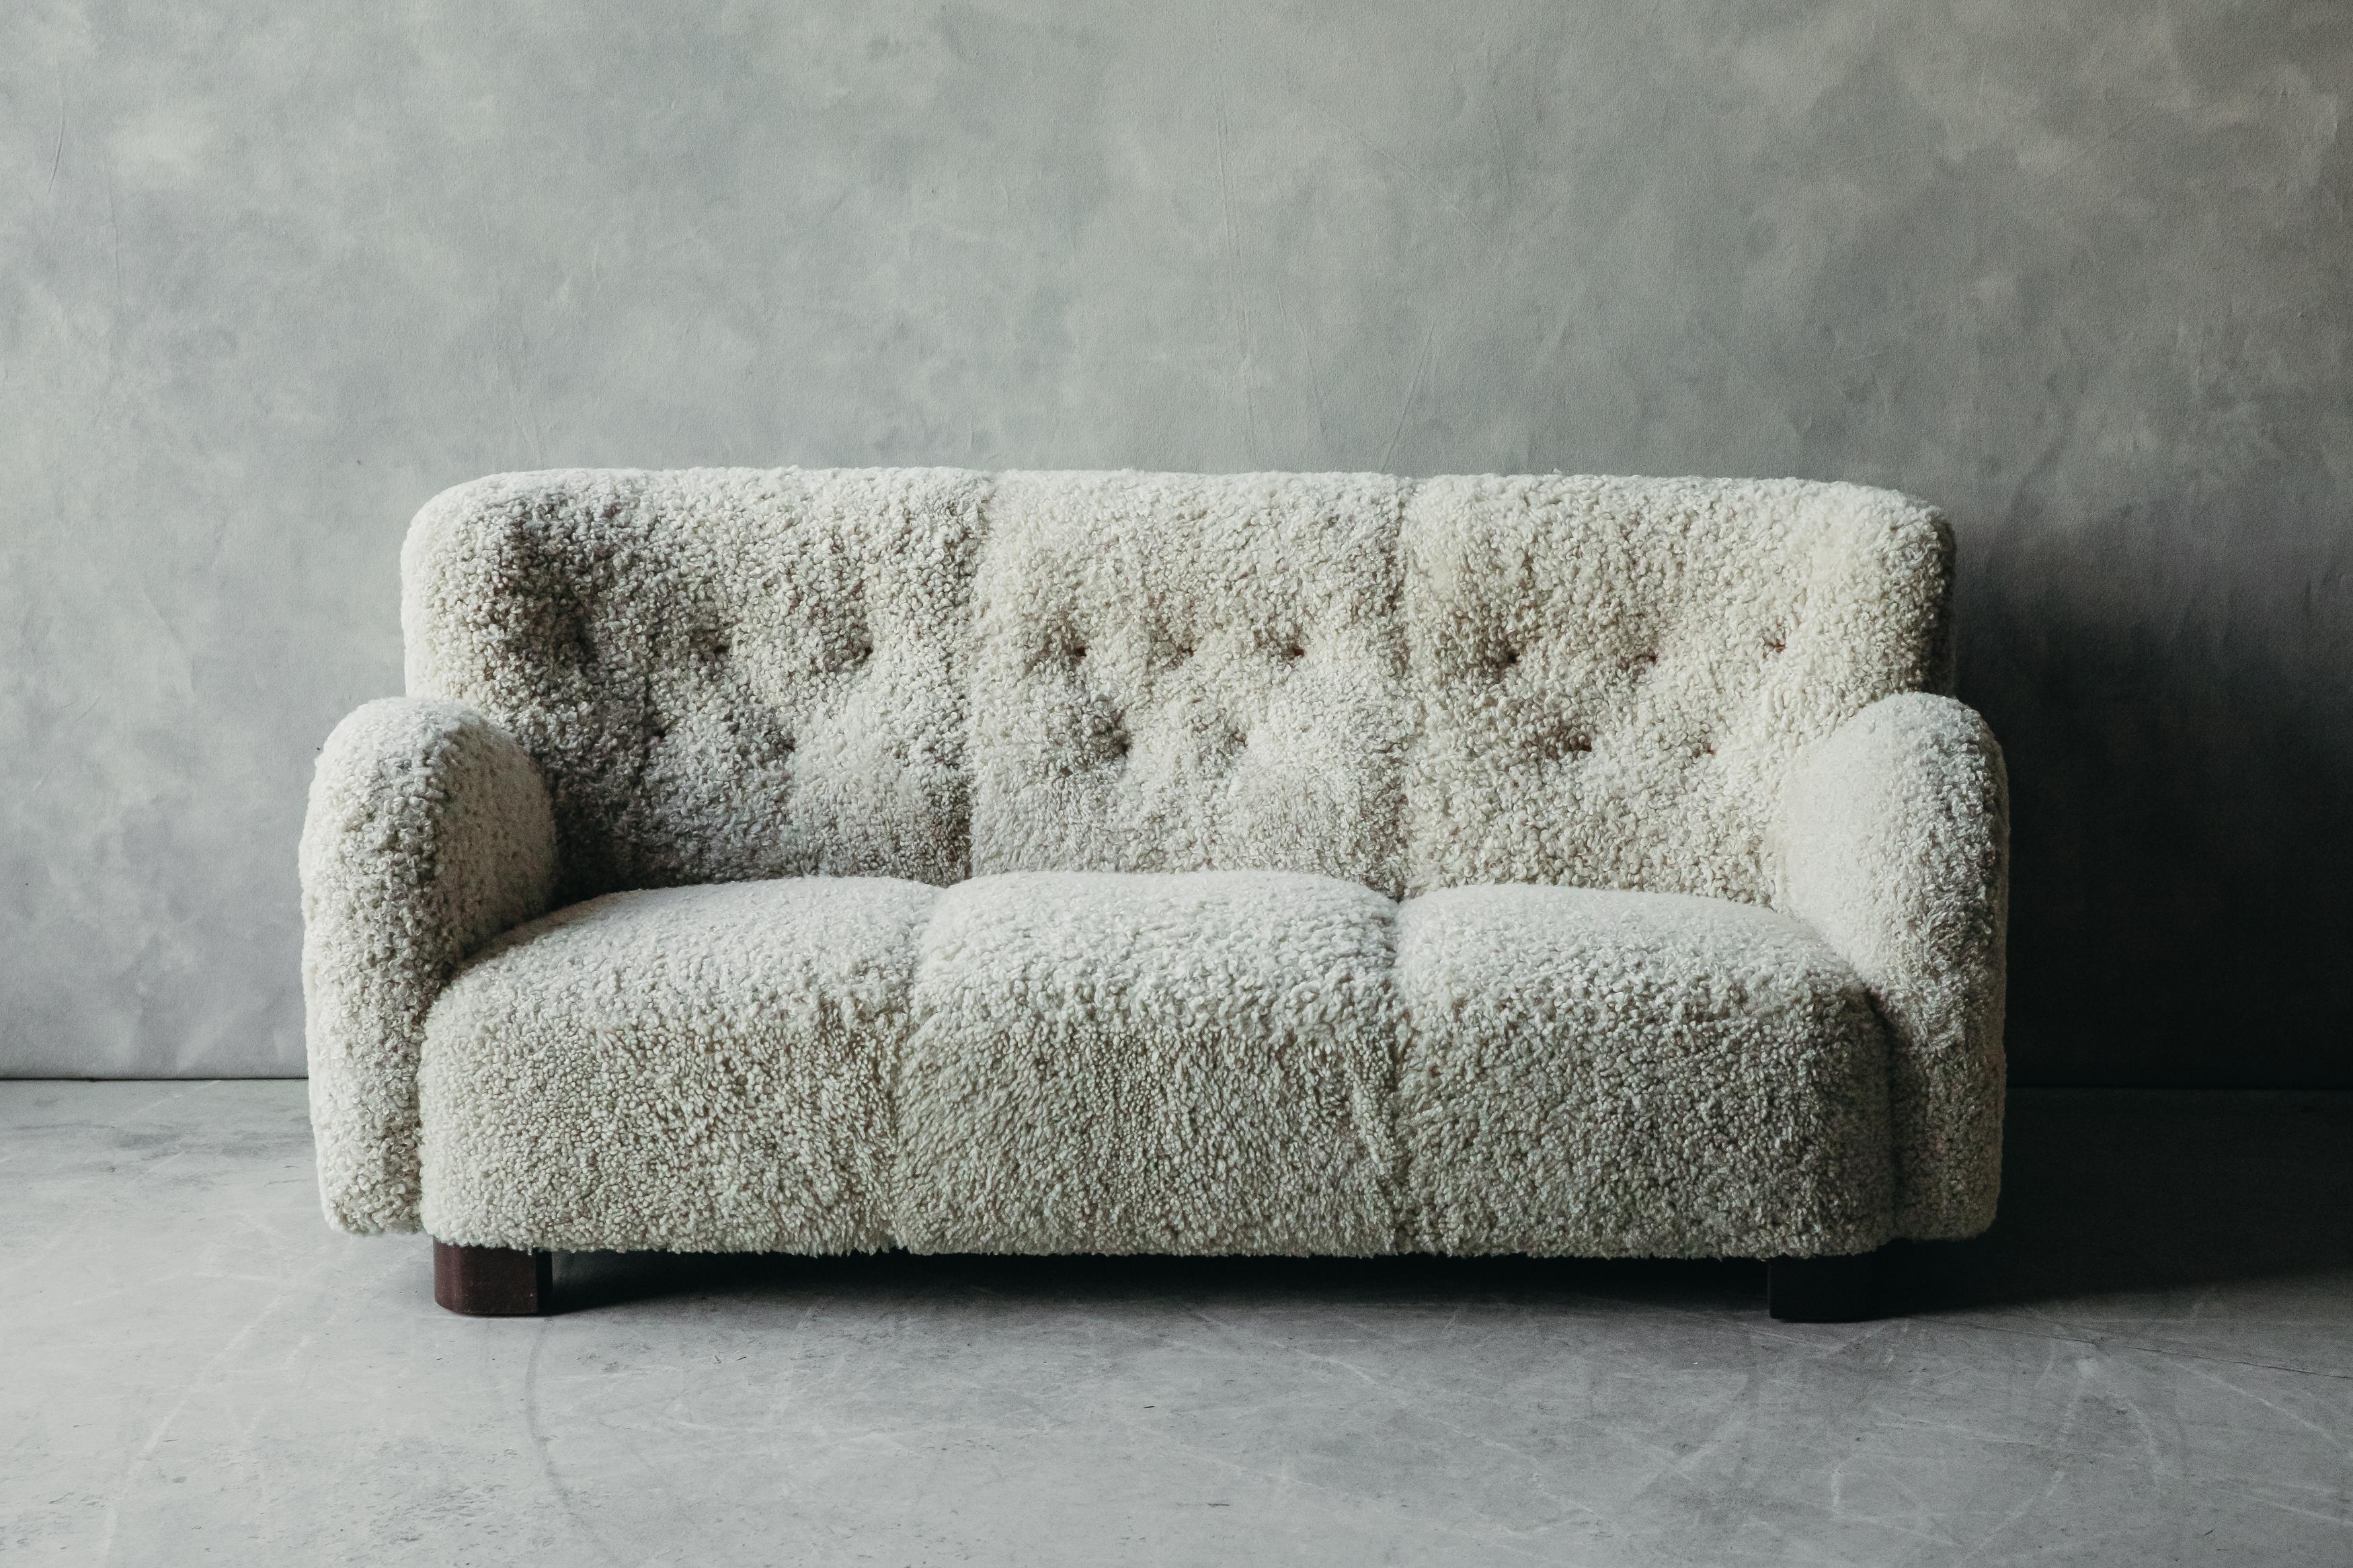 Vintage cabinetmaker sofa from Denmark, circa 1960. Later professionally upholstered in Denmark with premium shearling.

We don't have the time to write an extensive description on each of our pieces. We prefer to speak directly with our clients.